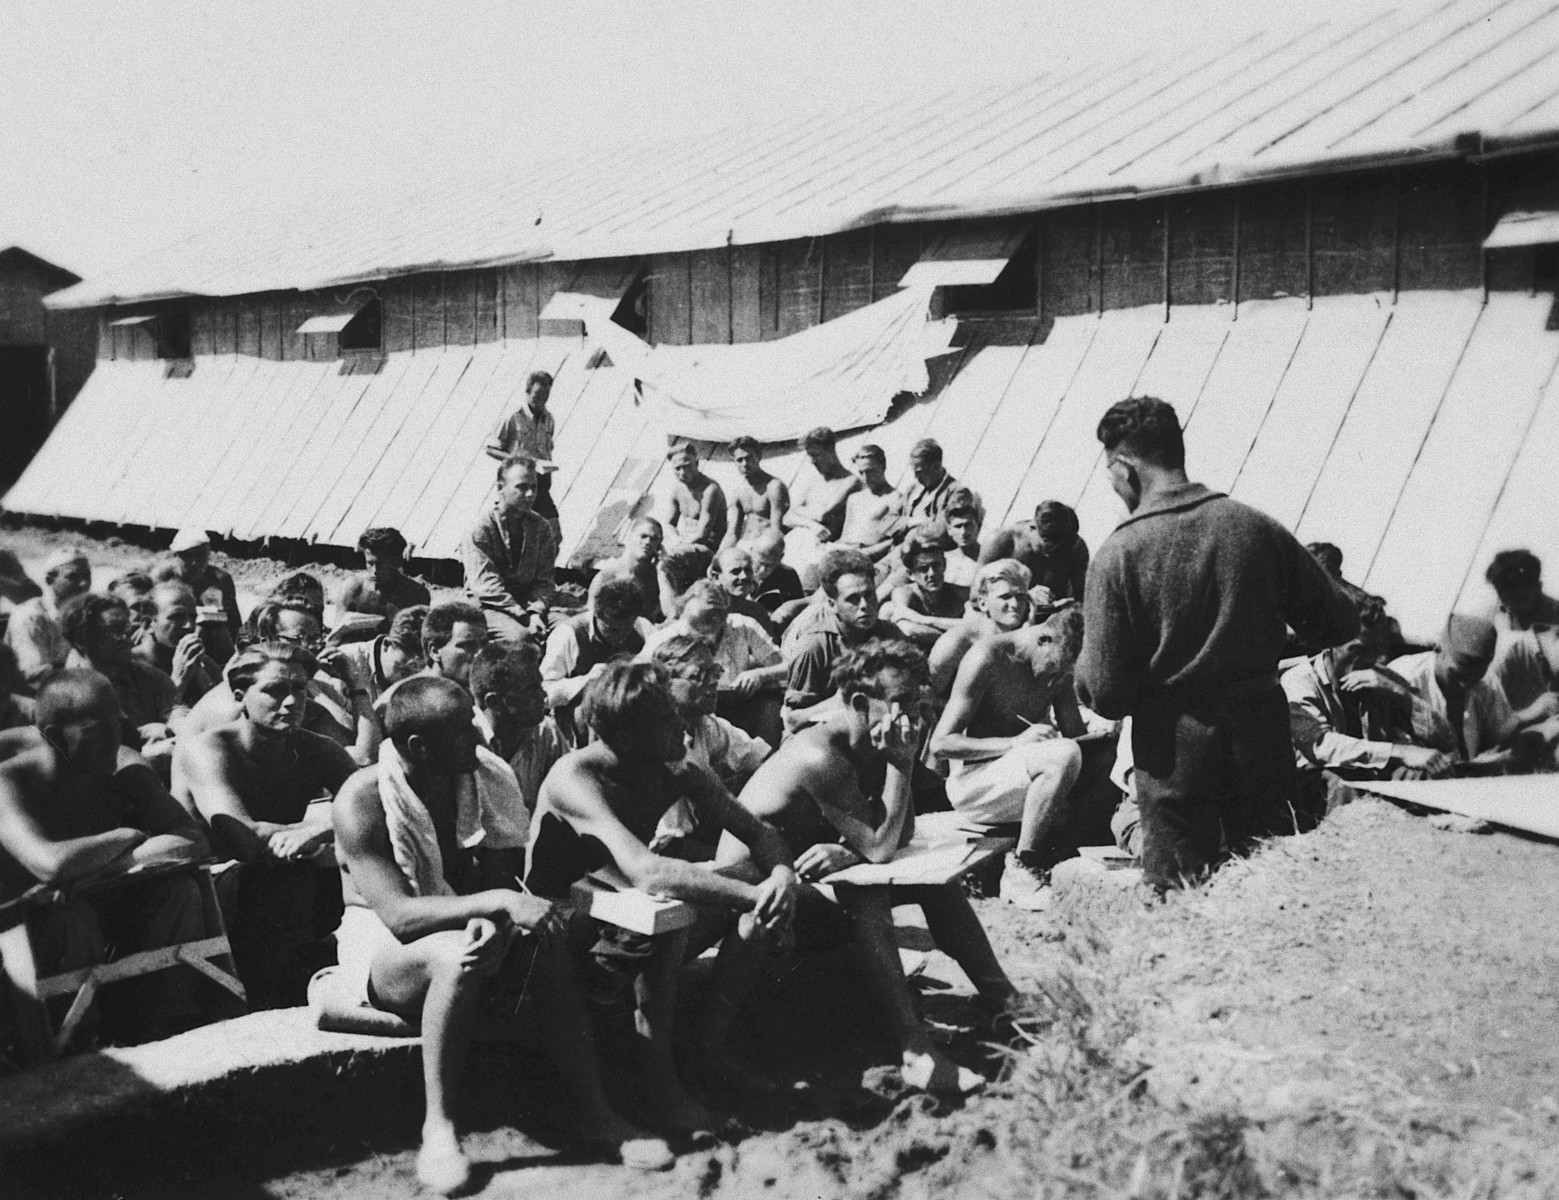 Prisoners listen to a talk in front of the barracks in the Gurs concentration camp in France.